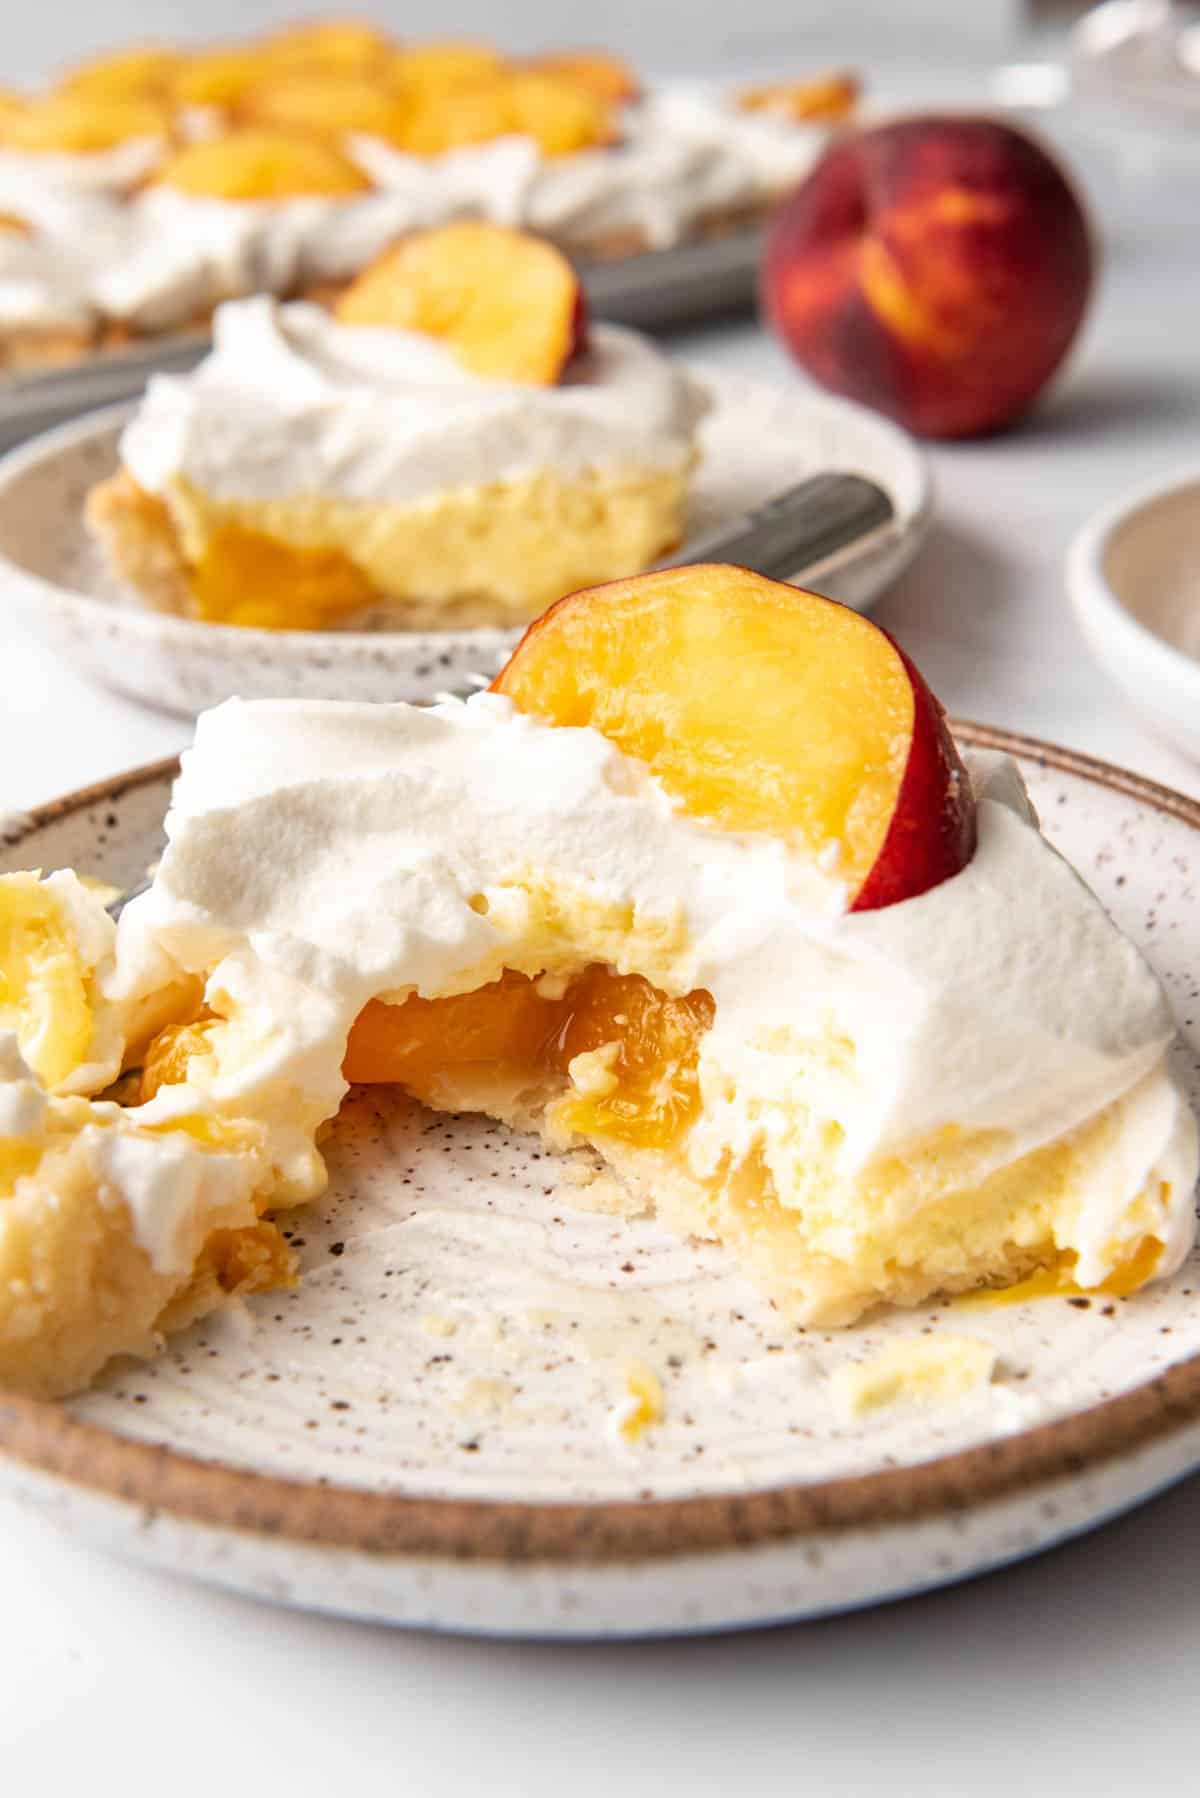 A piece of peaches and cream pie on a plate with a bite taken out of it.